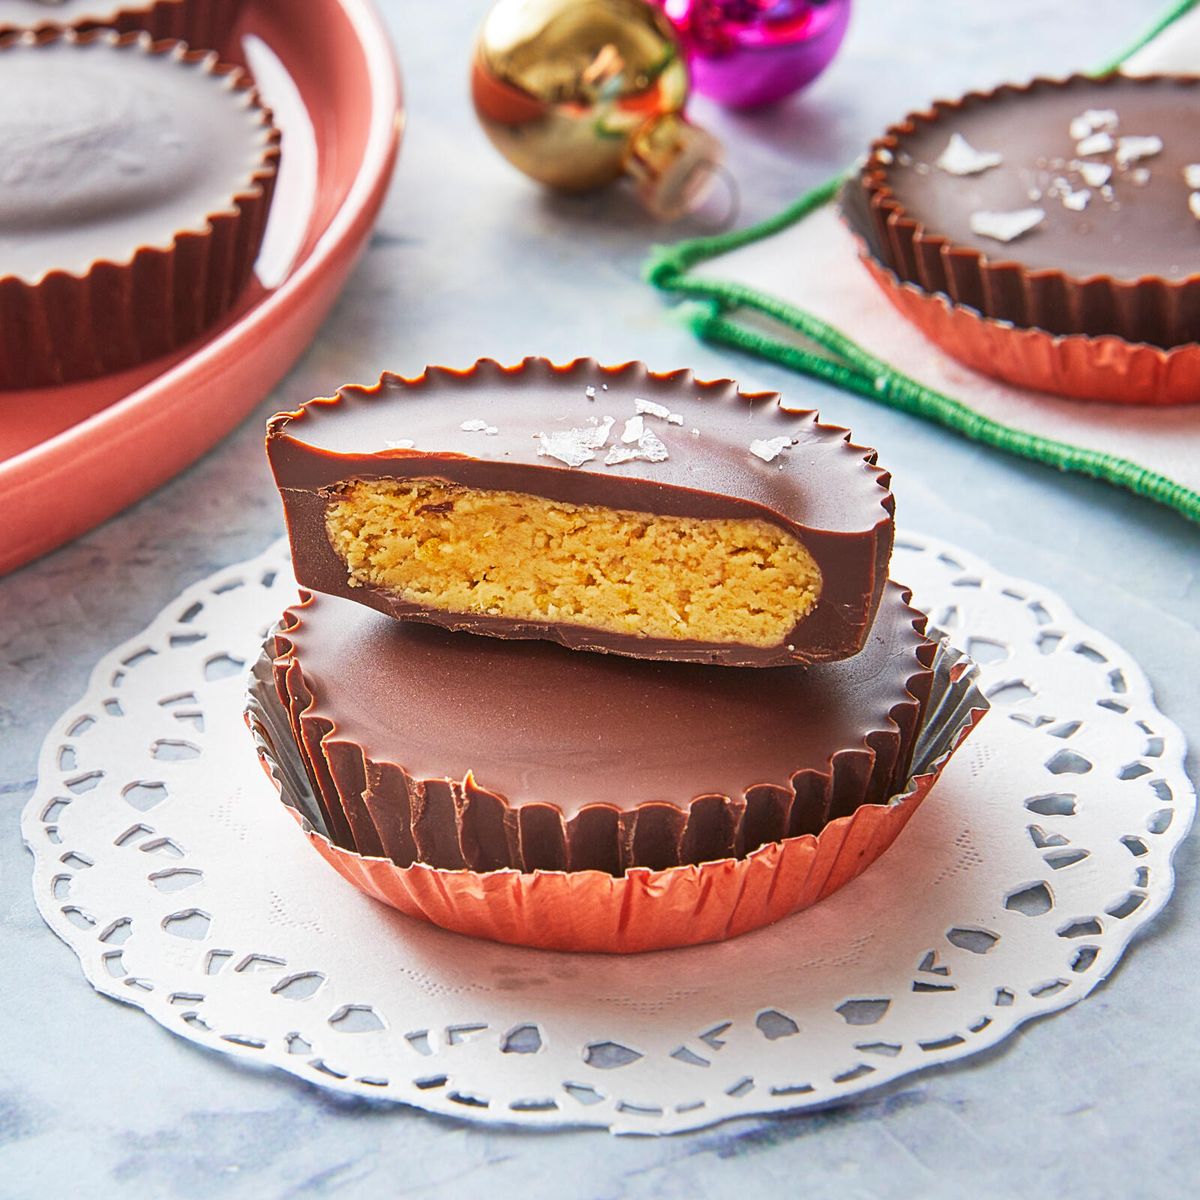 the pioneer woman's homemade peanut butter cup recipe